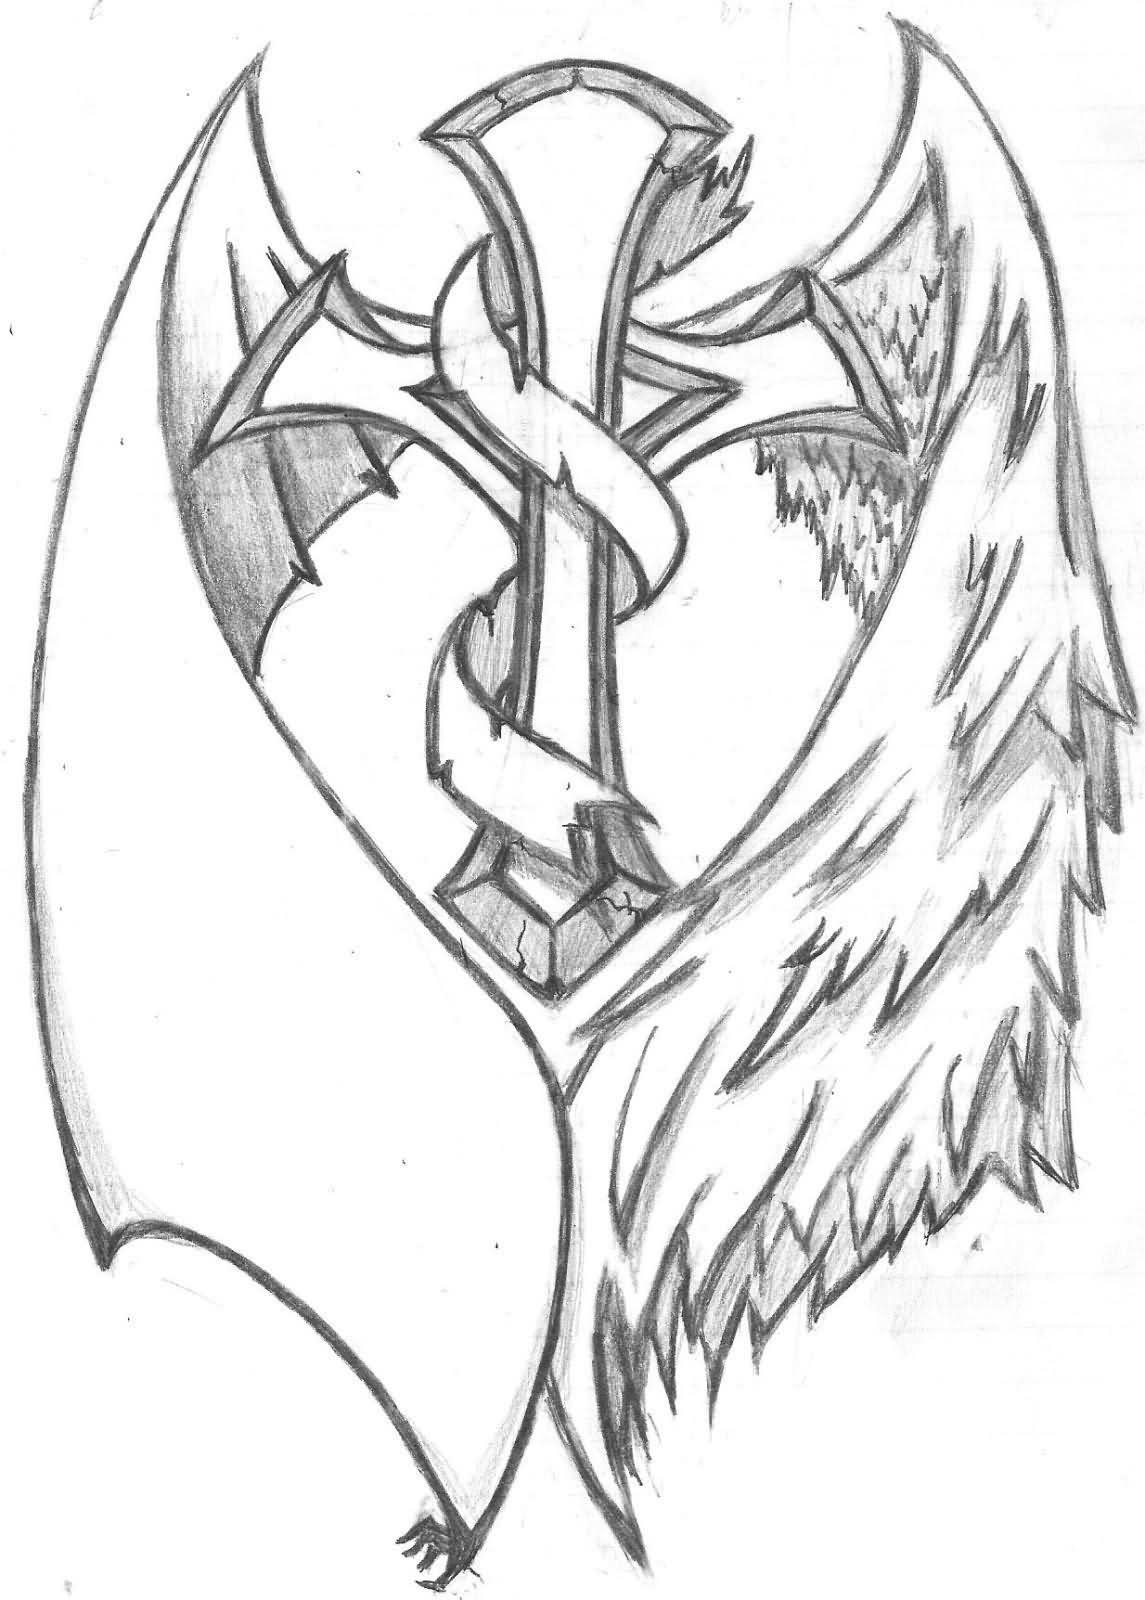 Black And Grey Cross With Wings Tattoo Design Streadwelljr pertaining to measurements 1145 X 1600